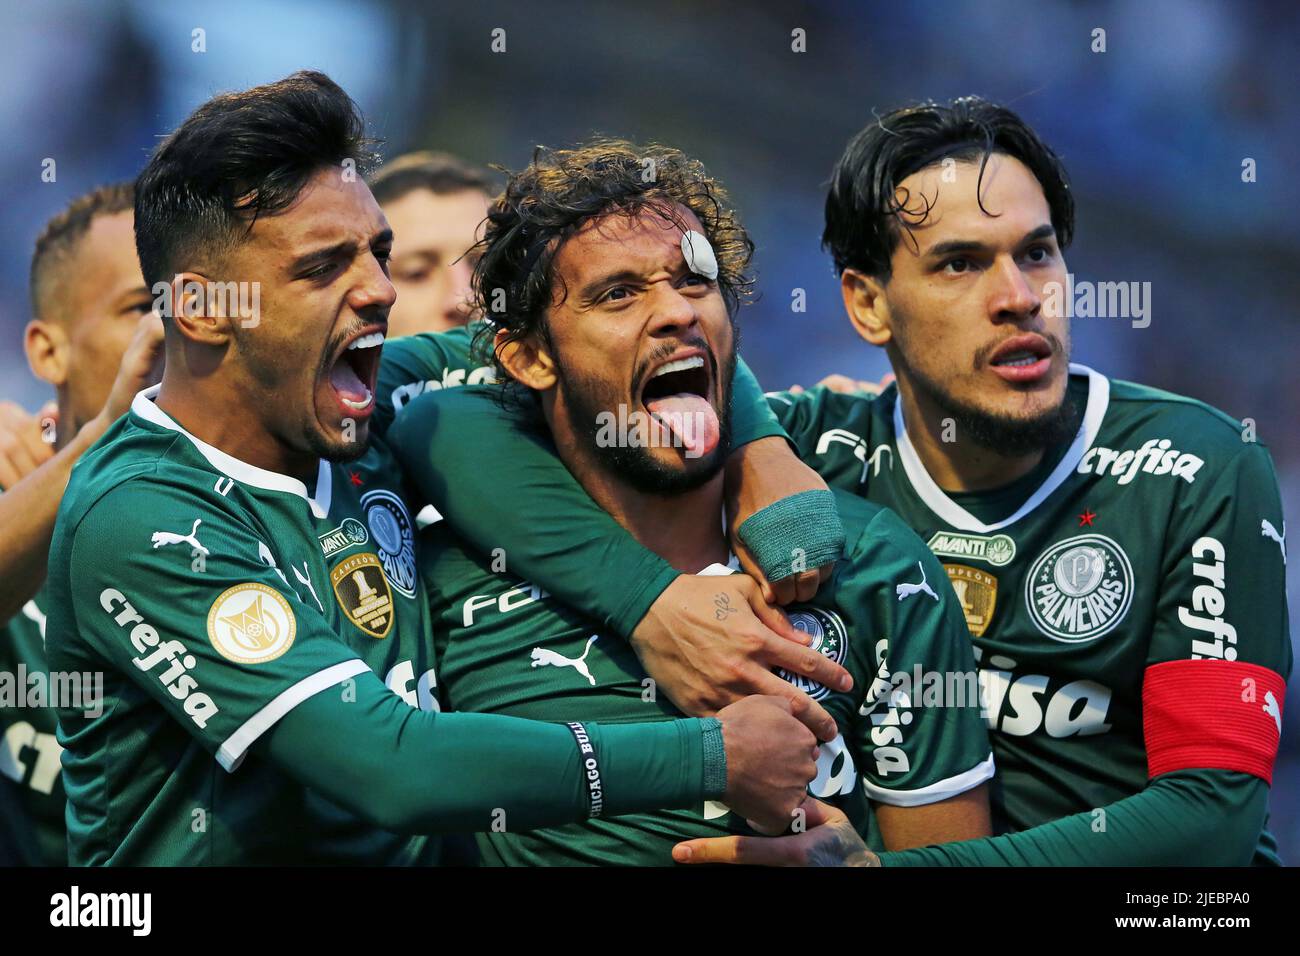 Florianopolis, Brazil. 26th June, 2022. Gustavo Scarpa do Palmeiras celebrates his goal with Gabriel Menino and Gustavo Gomez during the match between Avai and Palmeiras, for the 14th round of the Campeonato Brasileiro Serie A 2022, at Estadio da Ressacada this Sunday 26. (Heuler Andrey/SPP) Credit: SPP Sport Press Photo. /Alamy Live News Stock Photo